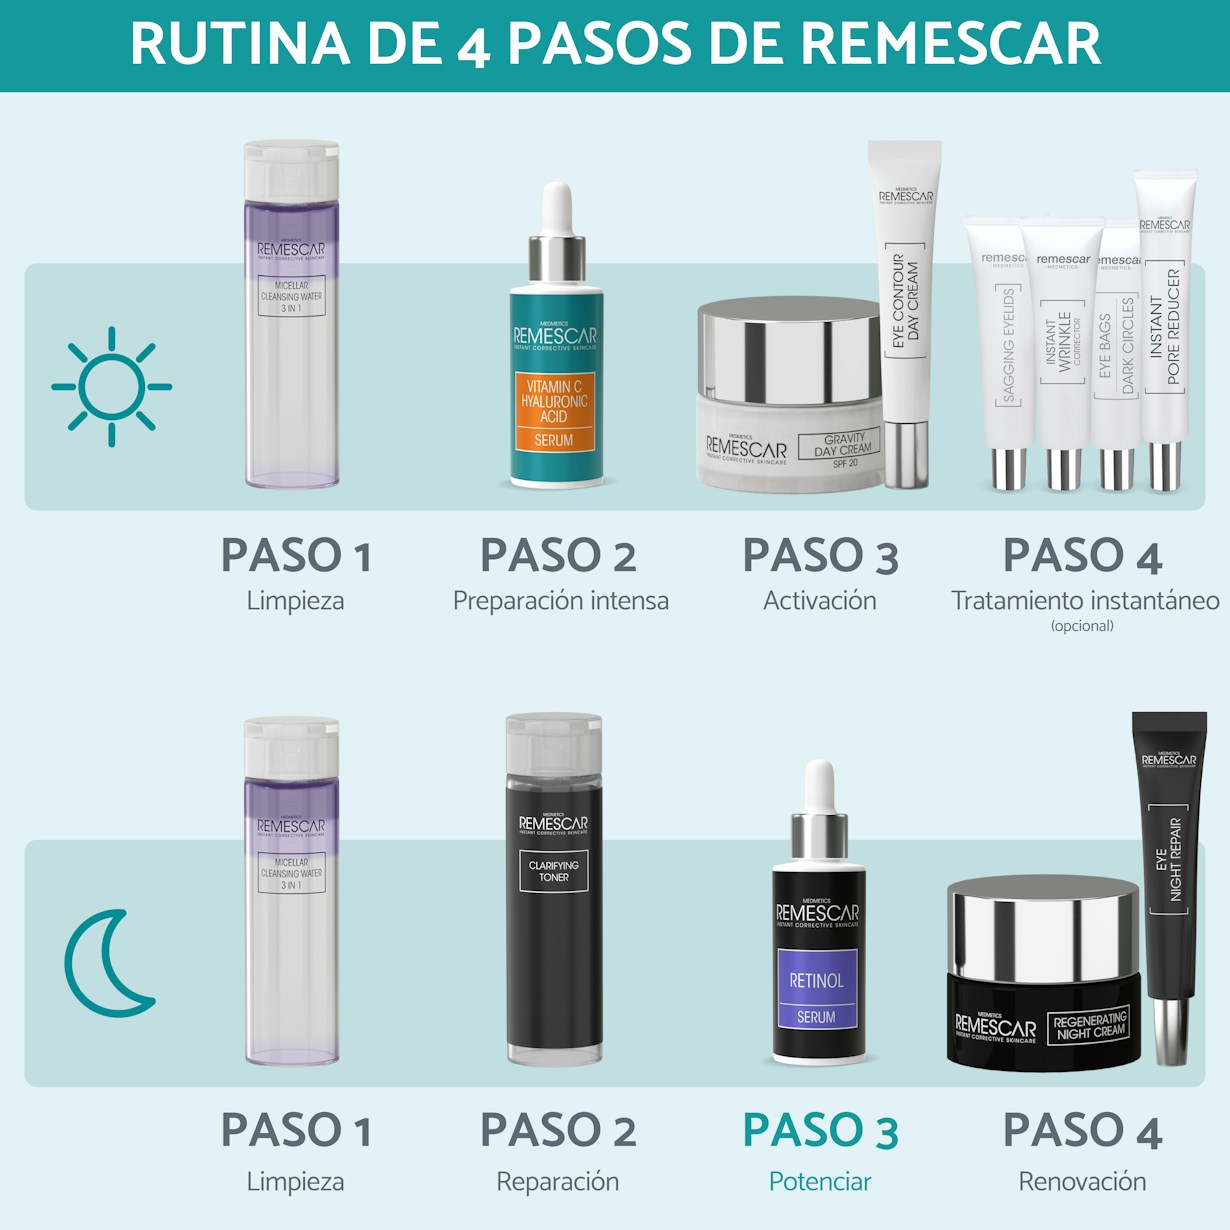 Remescar pdp pictures website and amazon 2000x2000px retinol serum ES6